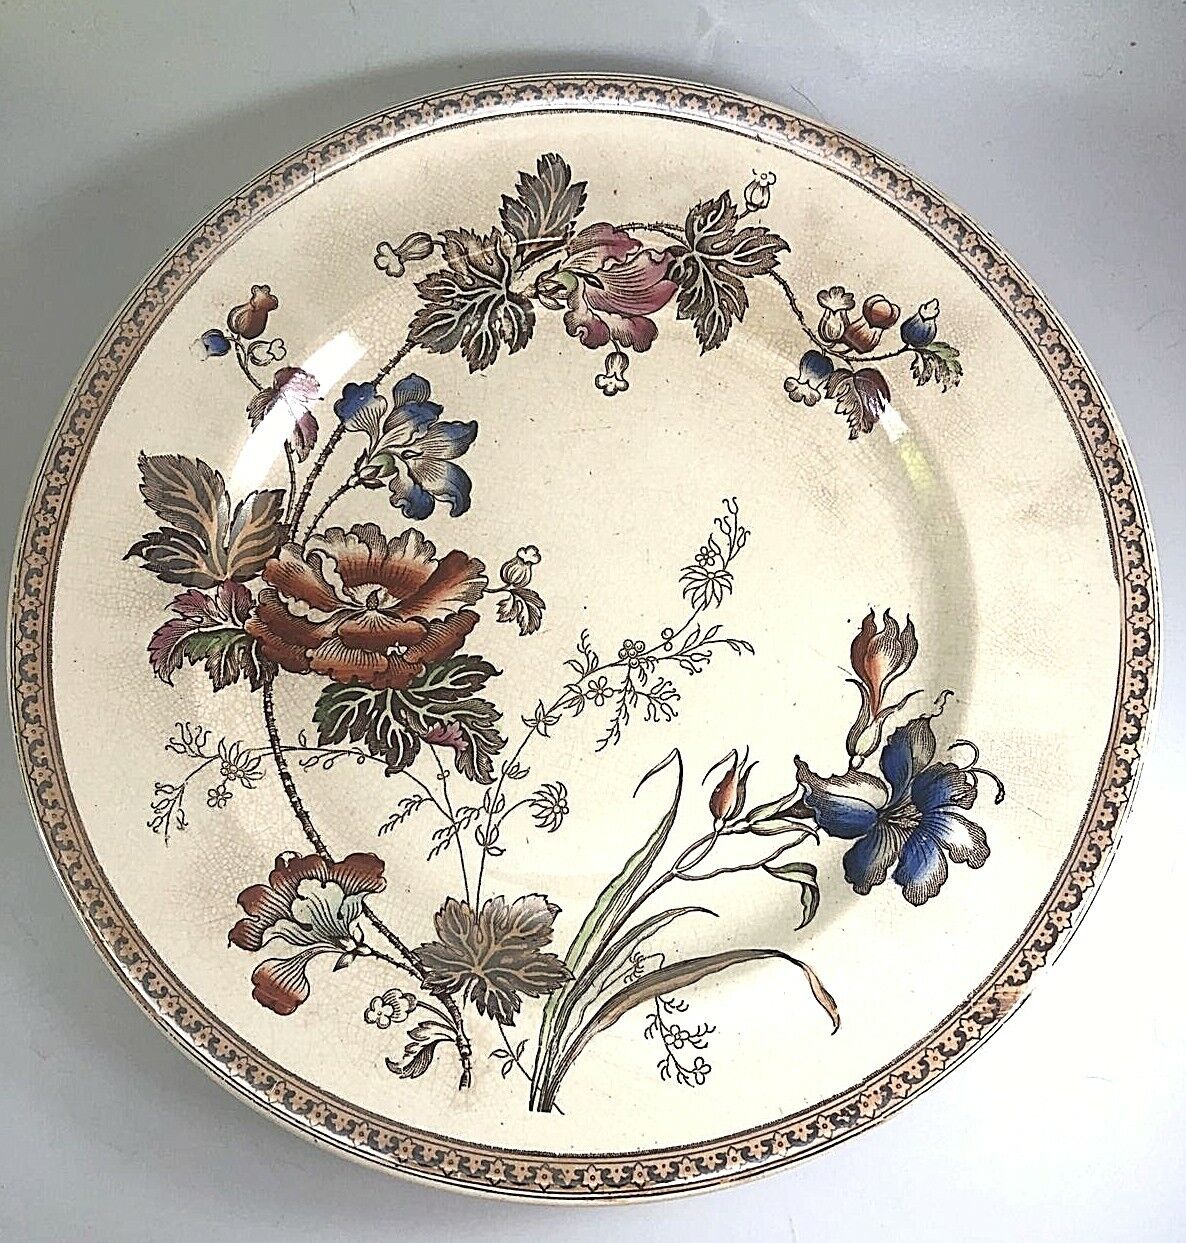 Brownfield Aesthetic Polychrome Texas Rose Floral Ironstone Plate 1850-1899